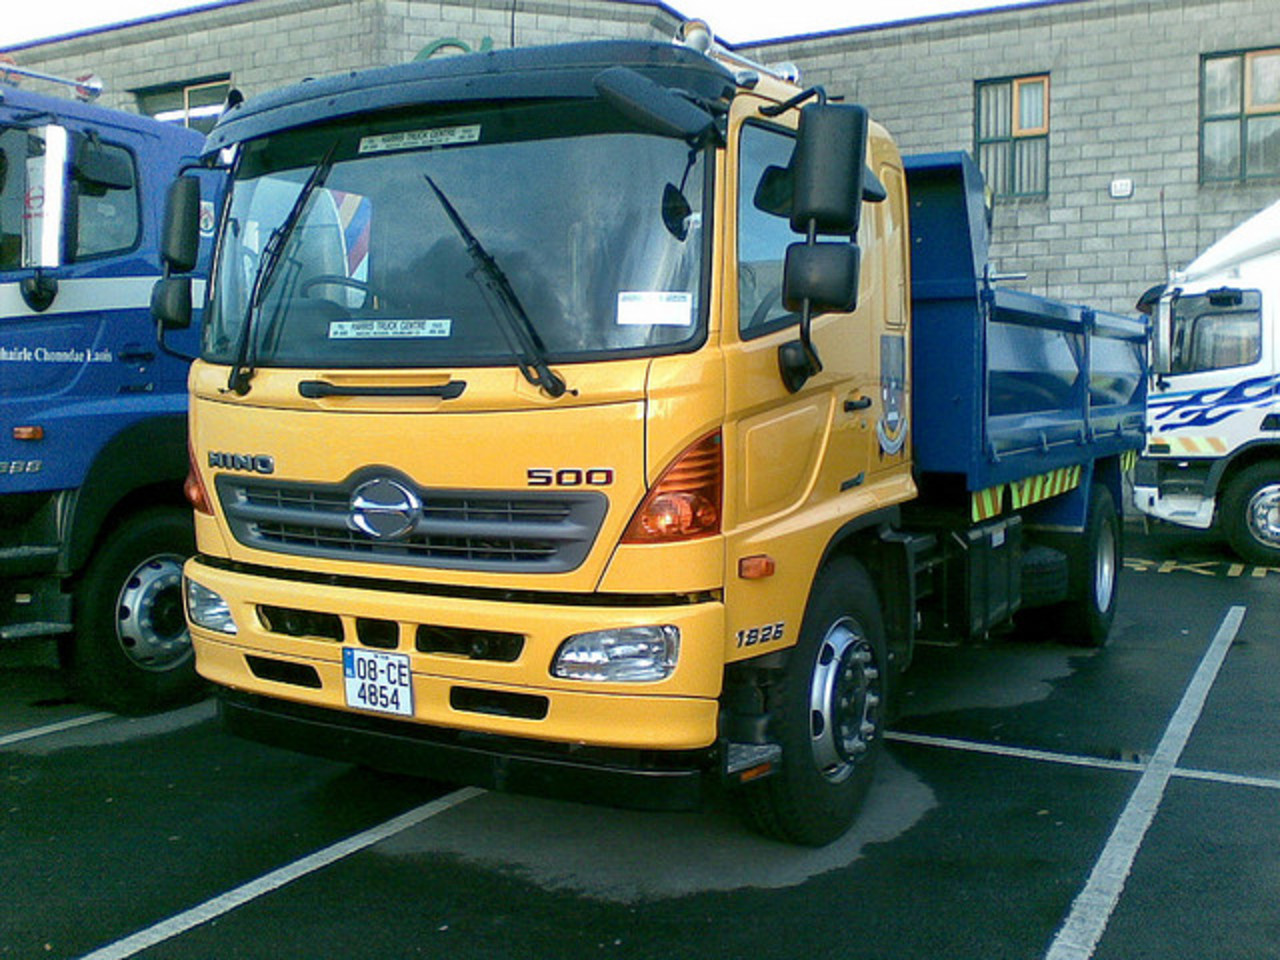 Clare County Council Hino 500 1325 08-CE-4854 | Flickr - Photo ...